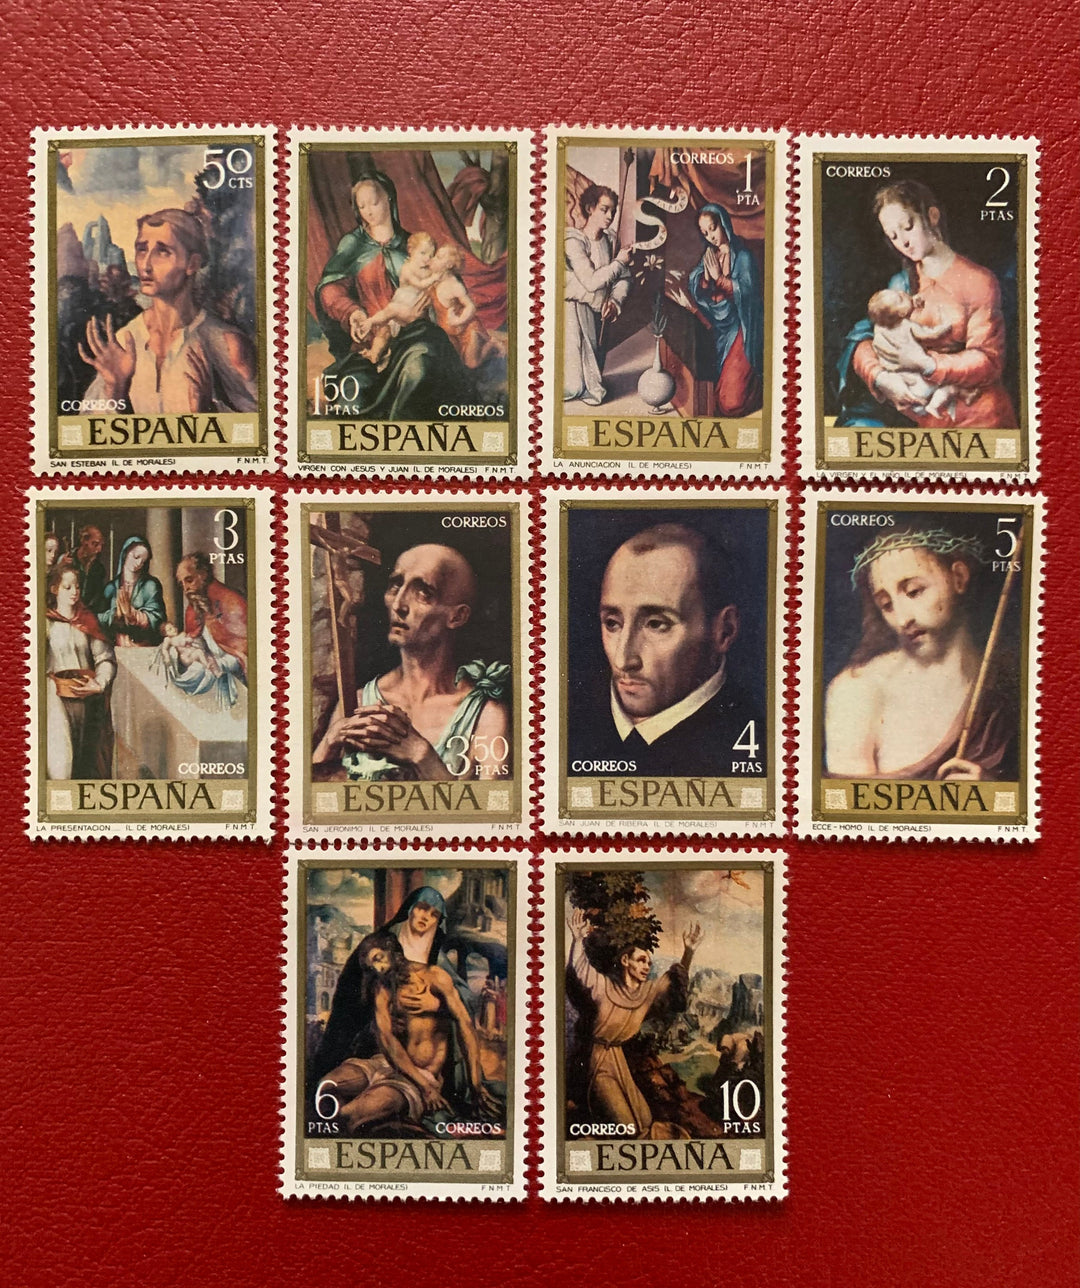 Spain - Original Vintage Postage Stamps- 1970 Paintings- for the collector, artist or crafter - scrapbooks, decoupage, collage